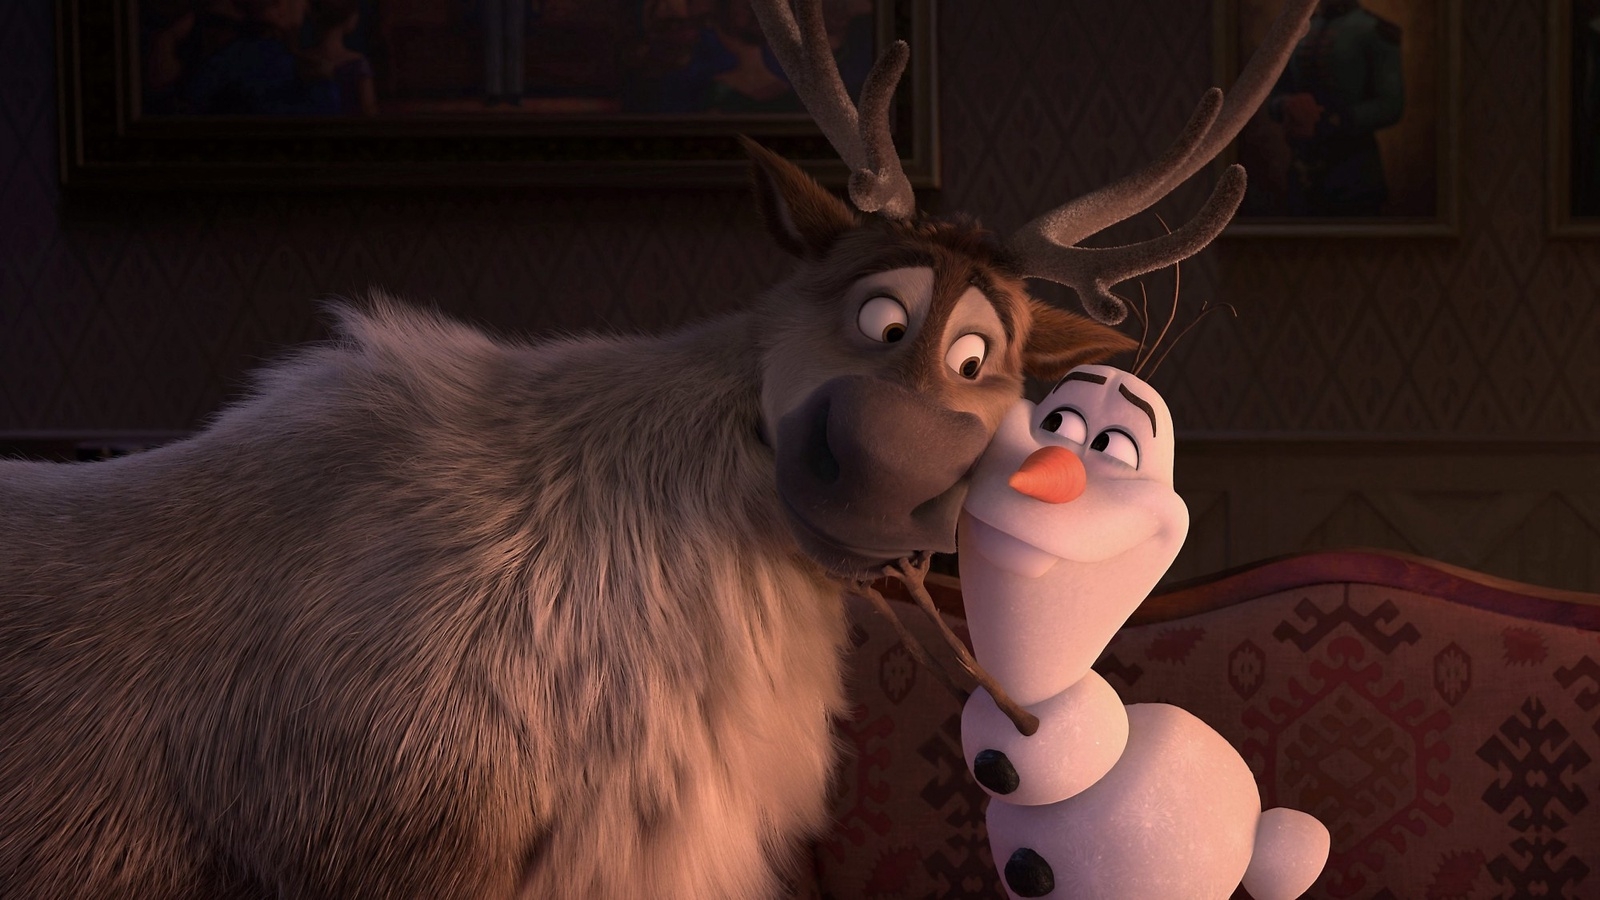 This image released by Disney shows characters Sven, left, and Olaf, voiced by Josh Gad, in a scene from the animated film, "Frozen 2." (Disney via AP)  CAET651